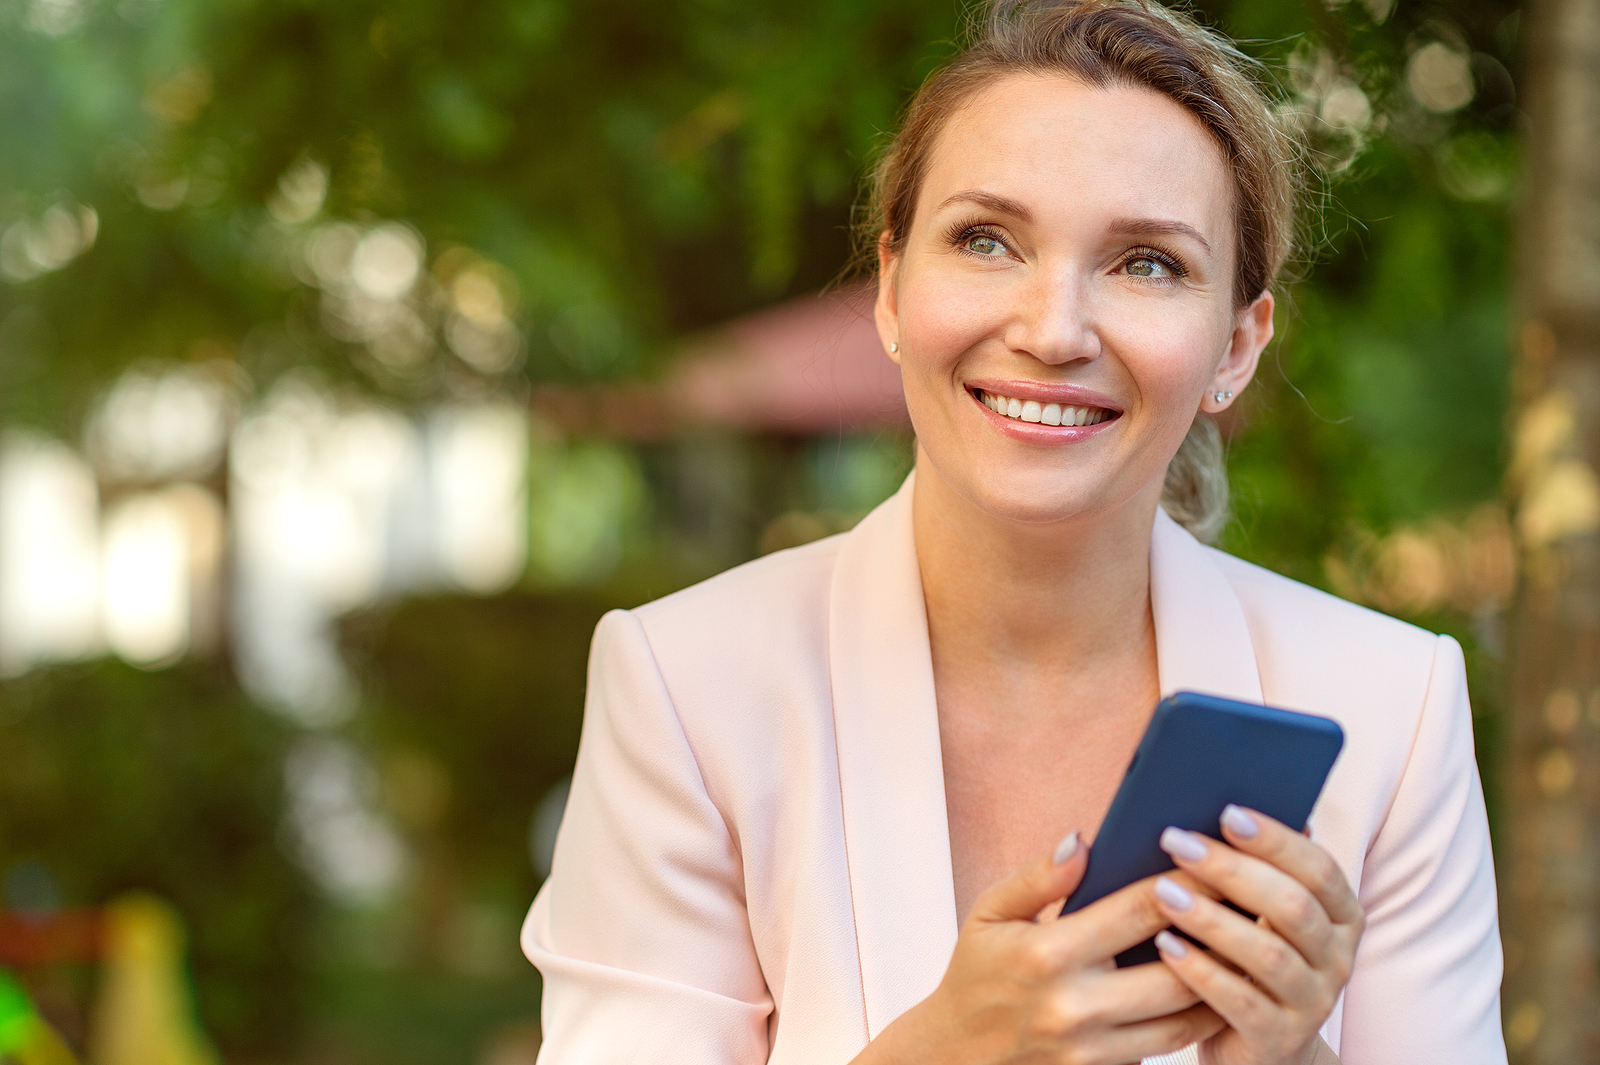 Close-up portrait of a smiling woman with smartphone on the street. Happy businesswoman is using phone, outdoors. Cheerful businesswoman in a jacket with cell phone in park looking away.